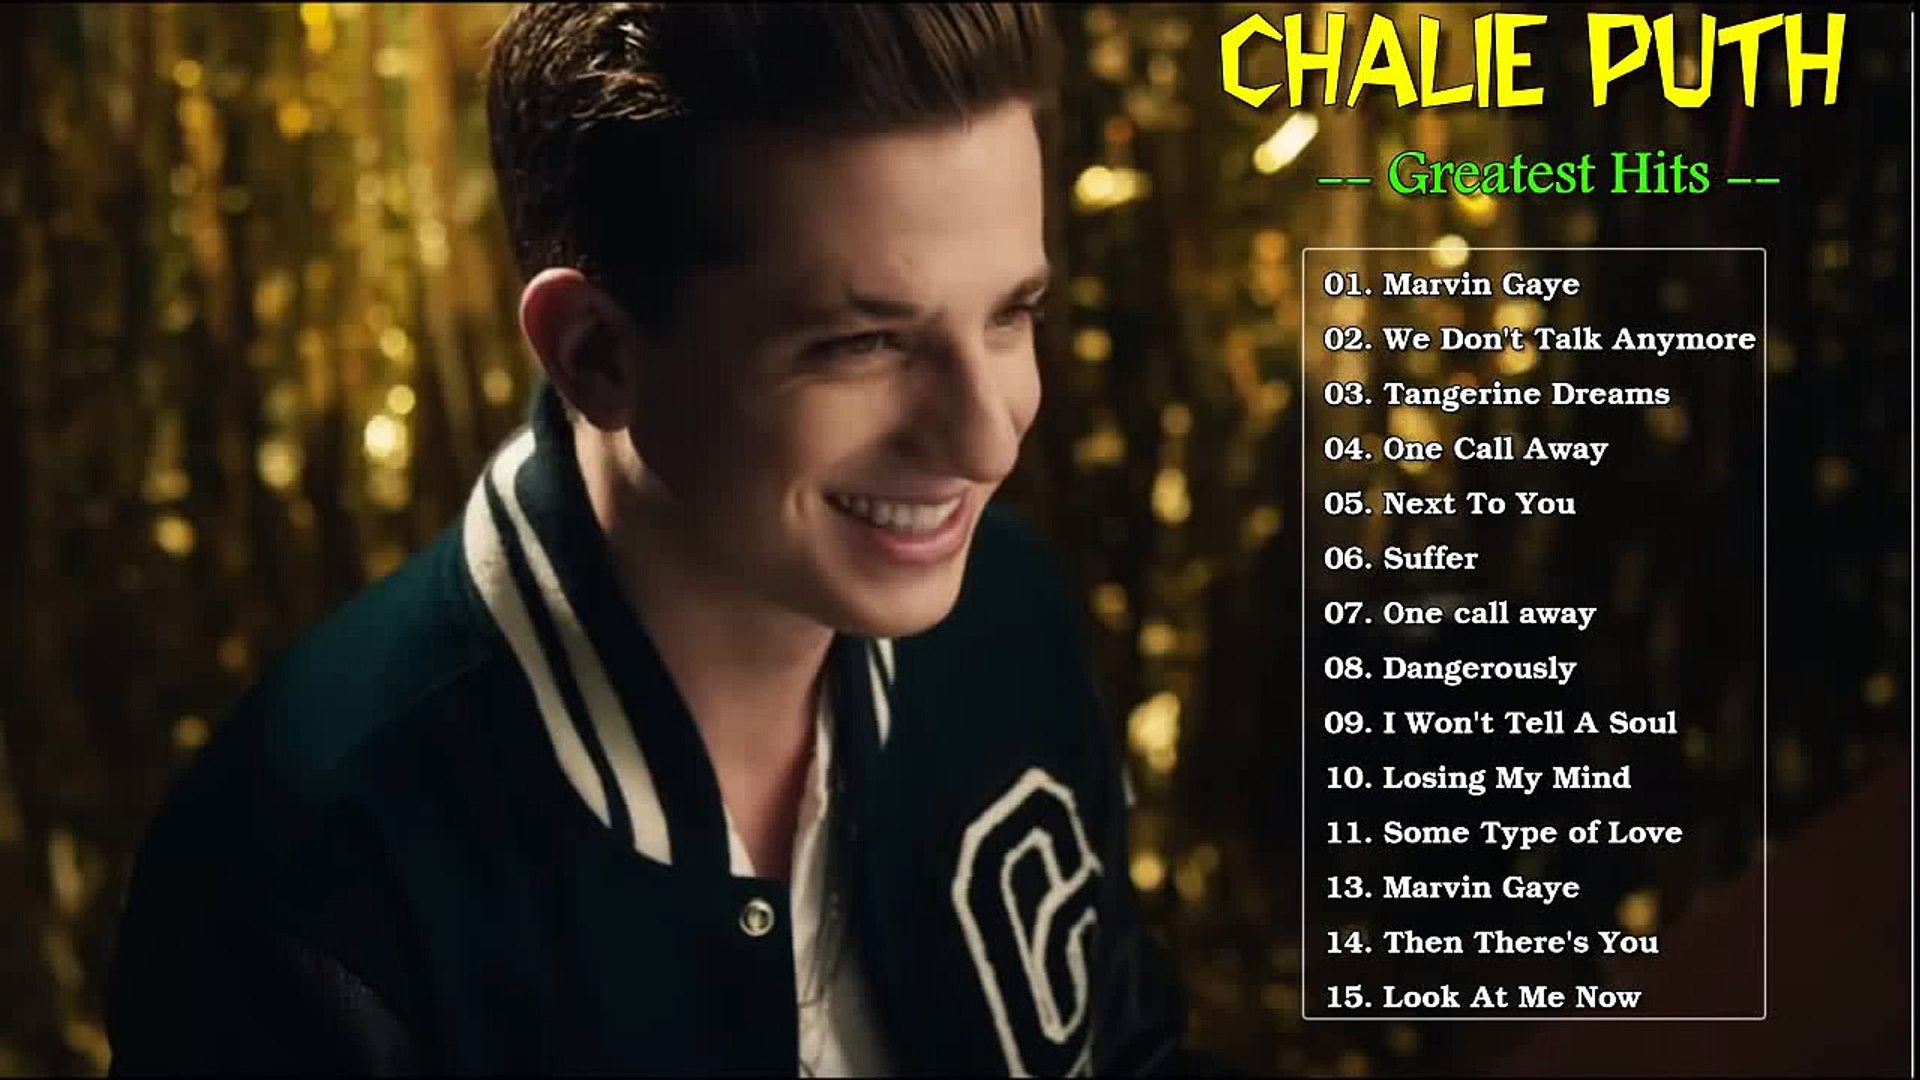 Charlie Puth Greatest Hits Full Album Cover 17 Charlie Puth Songs Video Dailymotion